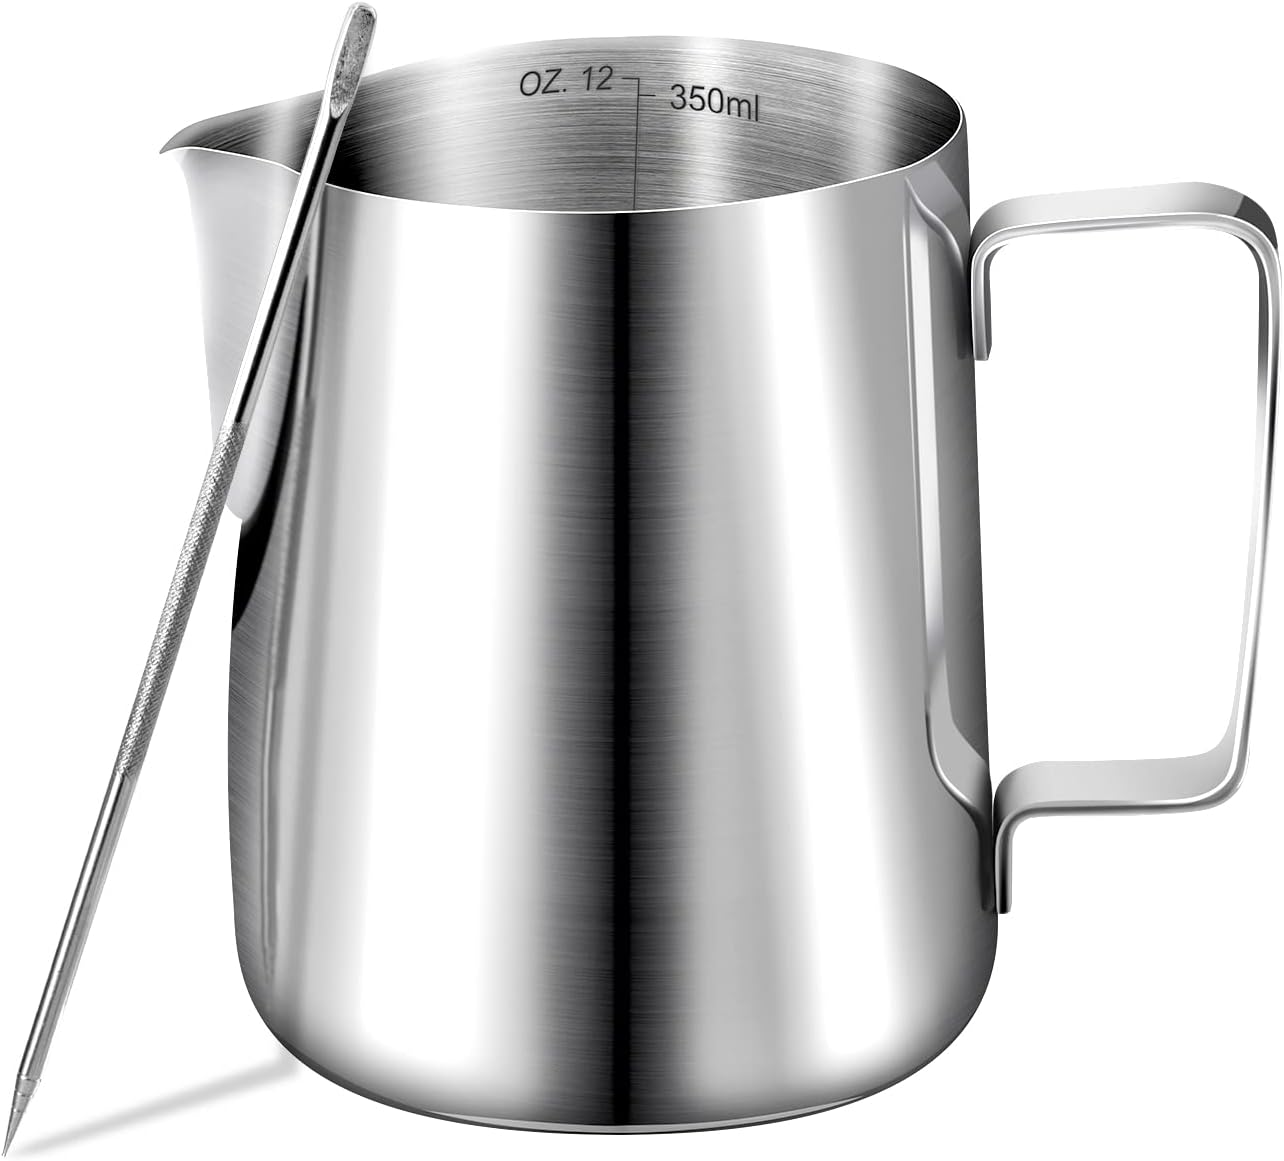 Milk Jug, Highly Polished 350 ml Stainless Steel Frothing Jug, 304 Stainless Steel Milk Frother and Latte Art Pen, Barista Accessories, Milk Jug Stainless Steel for Espresso Cappuccino (12fl.oz,
